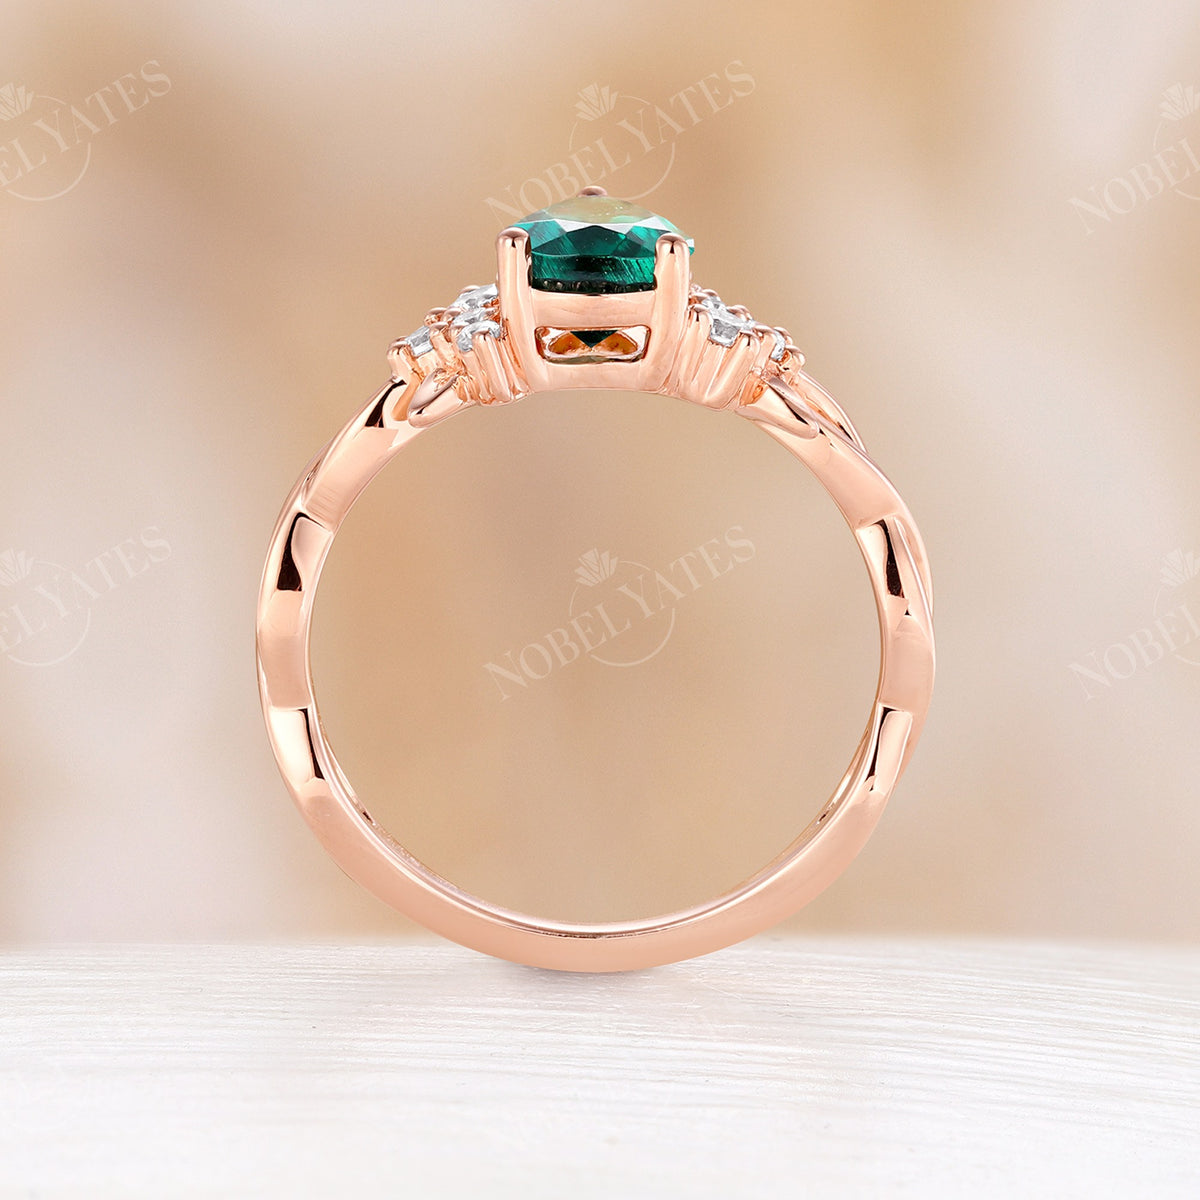 Nature Leaf Inspired Lab Emerald Pear Cut Engagement Ring Rose Gold